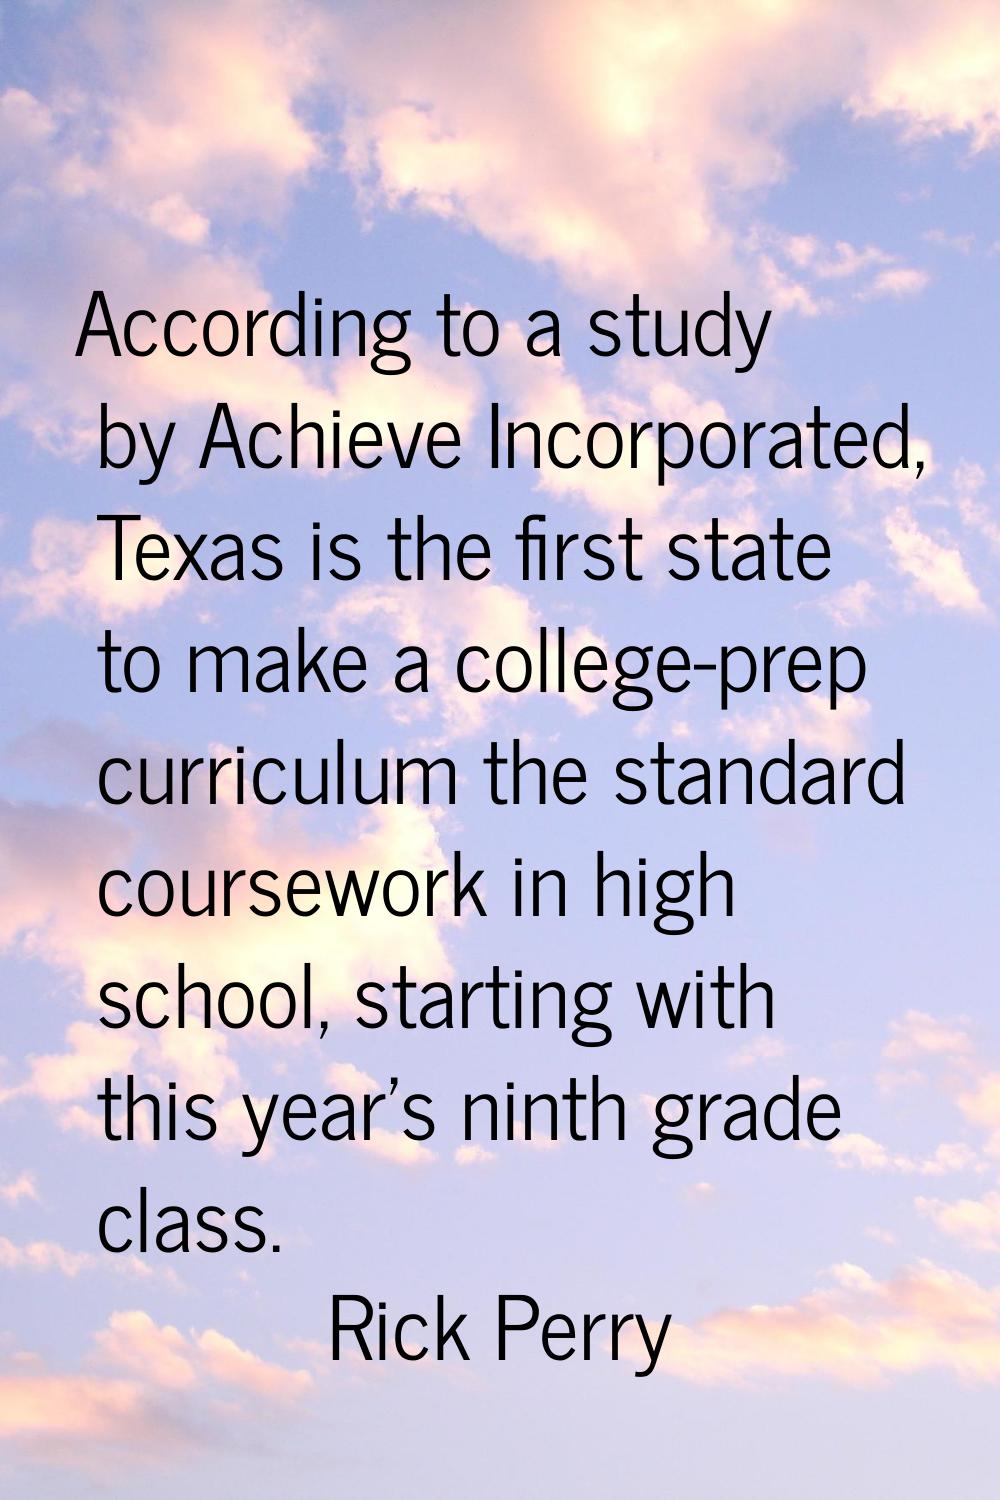 According to a study by Achieve Incorporated, Texas is the first state to make a college-prep curri